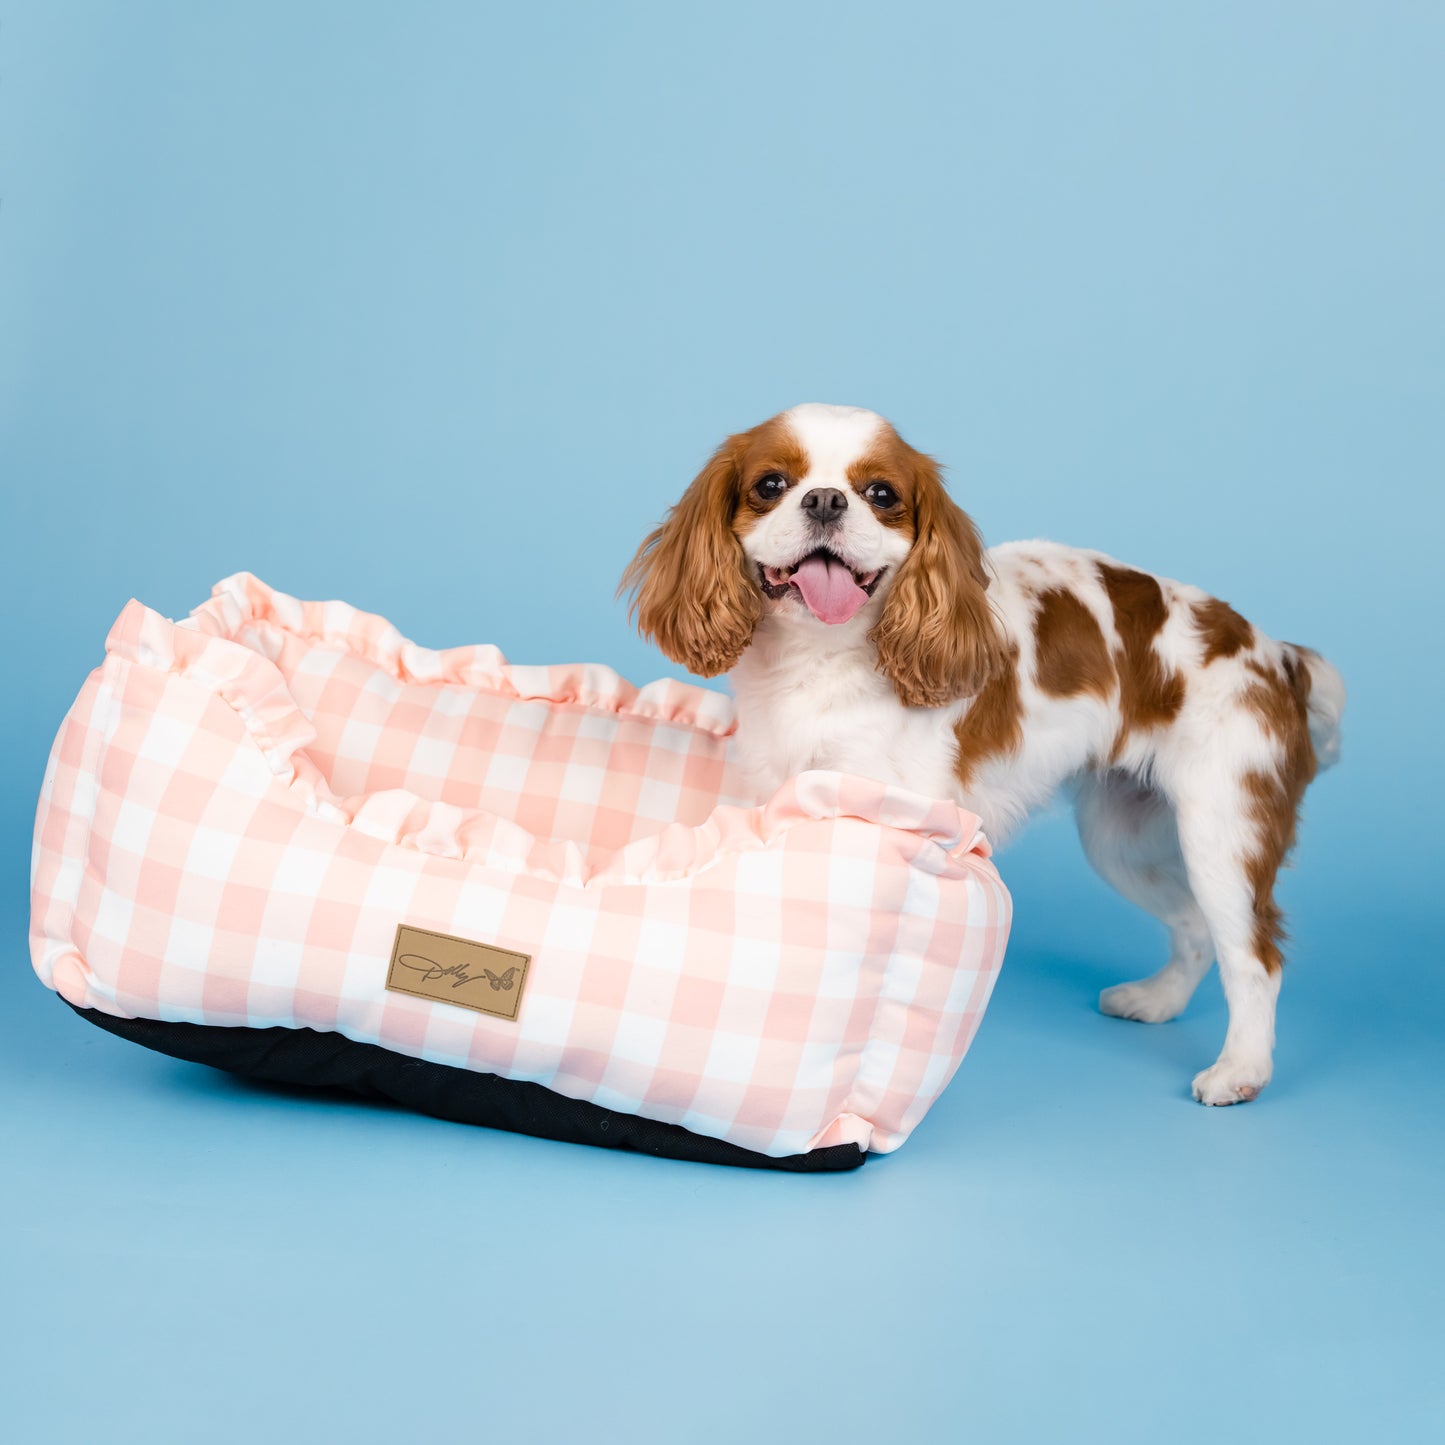 Buffalo Check Ruffle Cuddle Bed for Pets - Pink